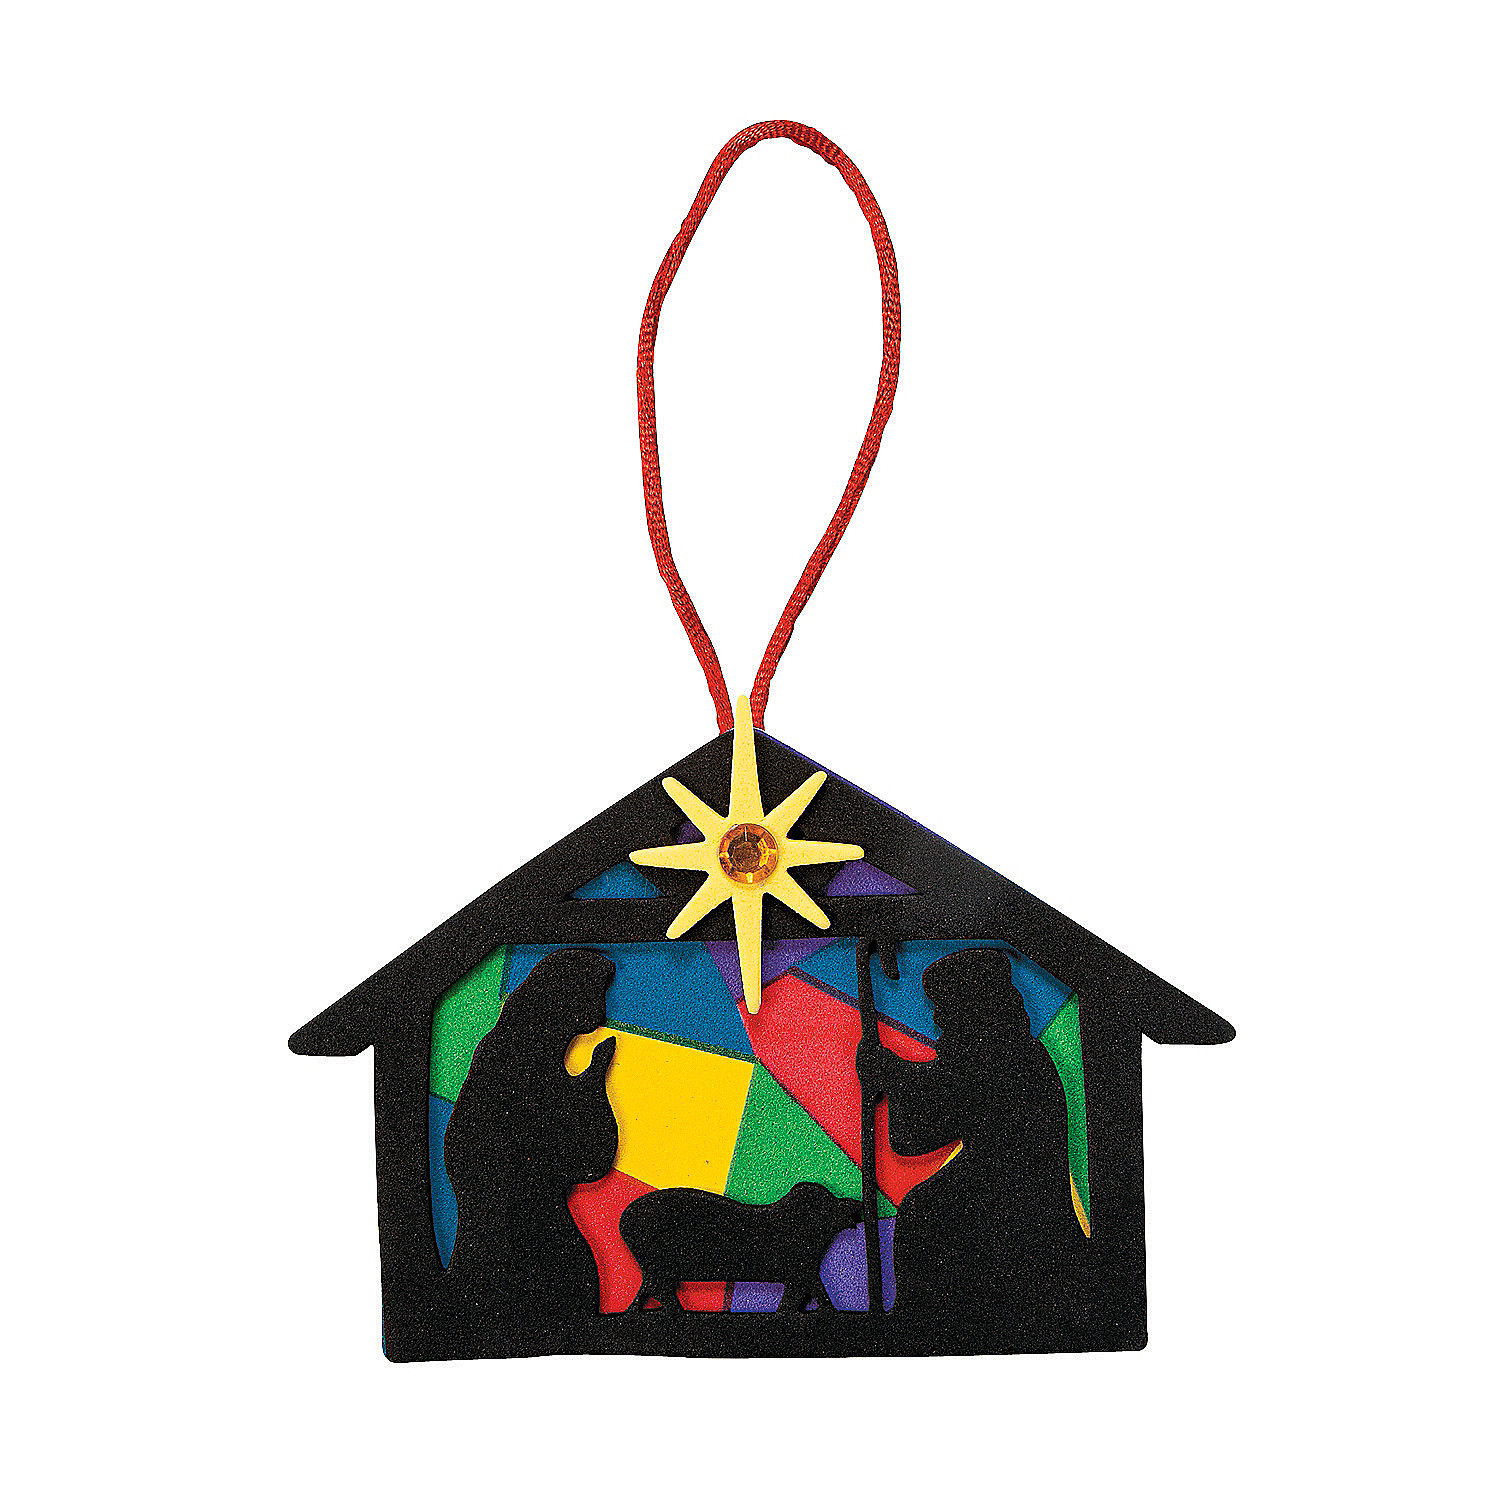 Christian Christmas Crafts For Kids
 Nativity Silhouette Christmas Ornament Craft Kit